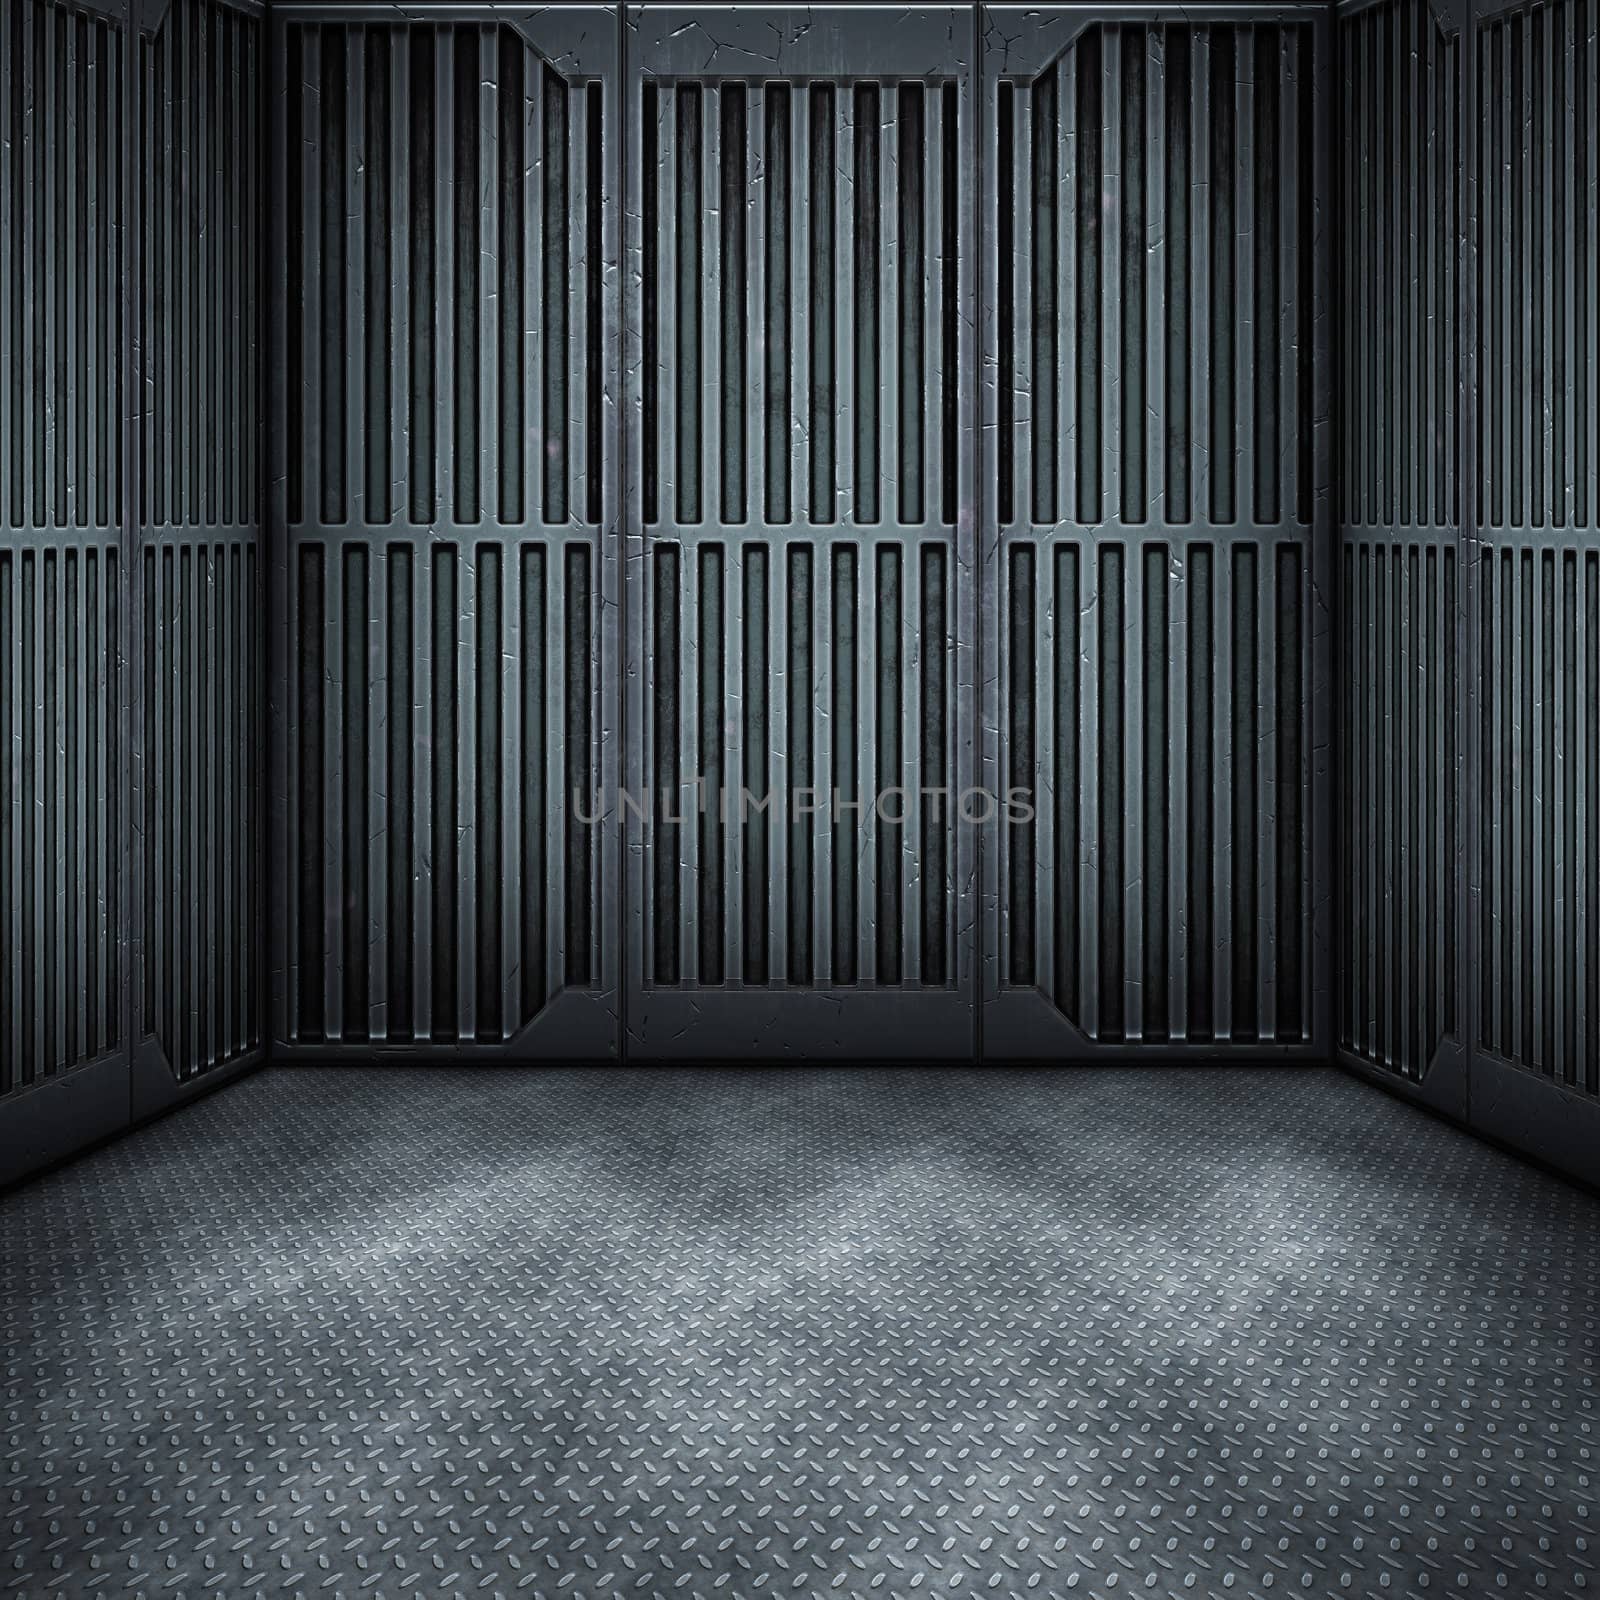 An image of a dark steel room background